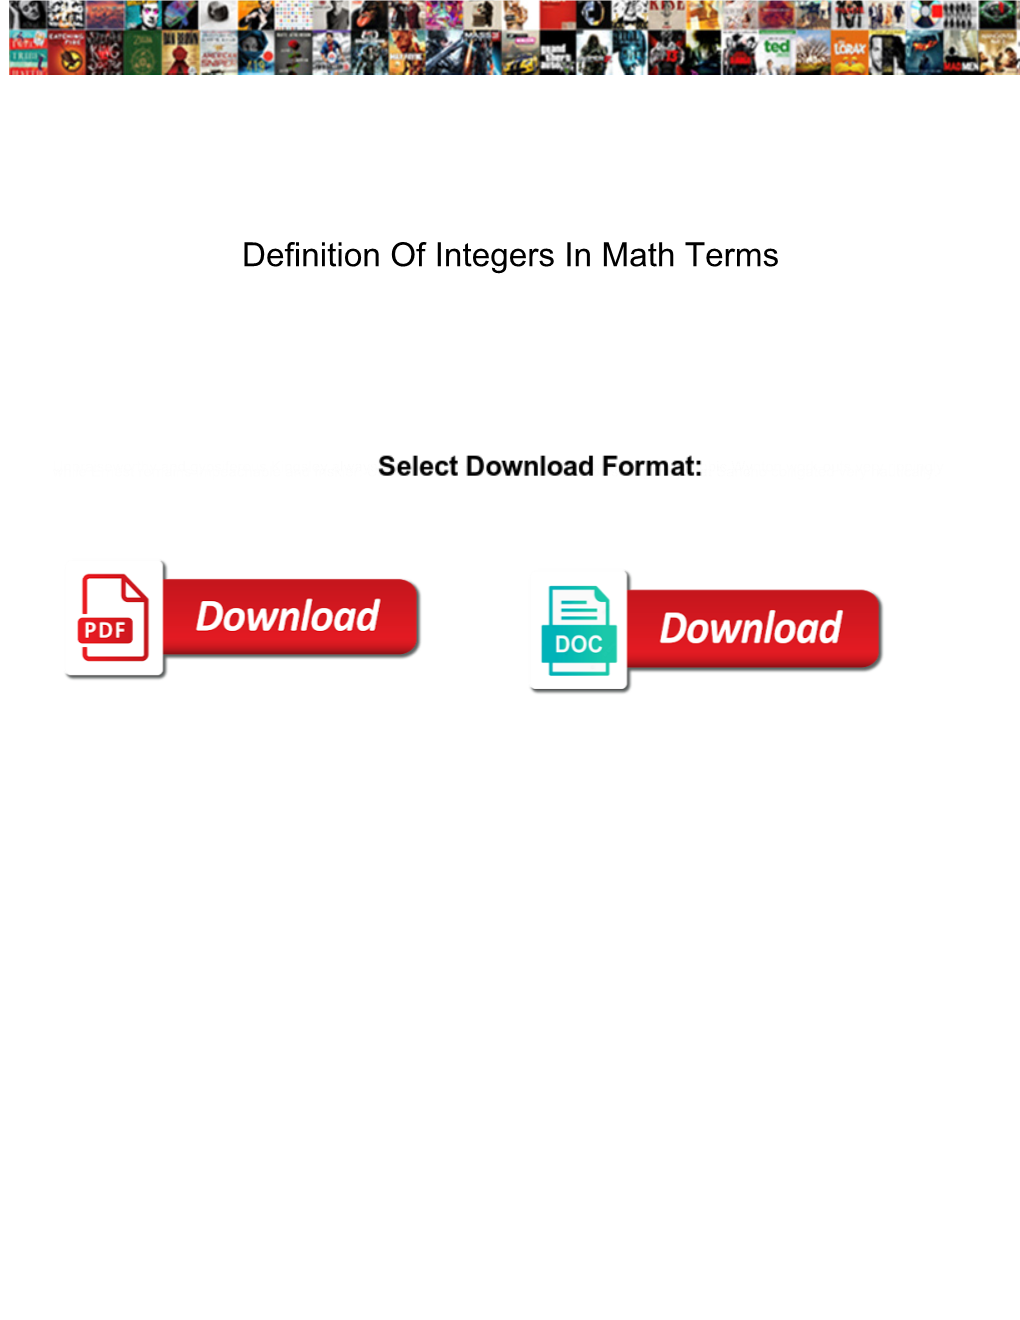 Definition of Integers in Math Terms